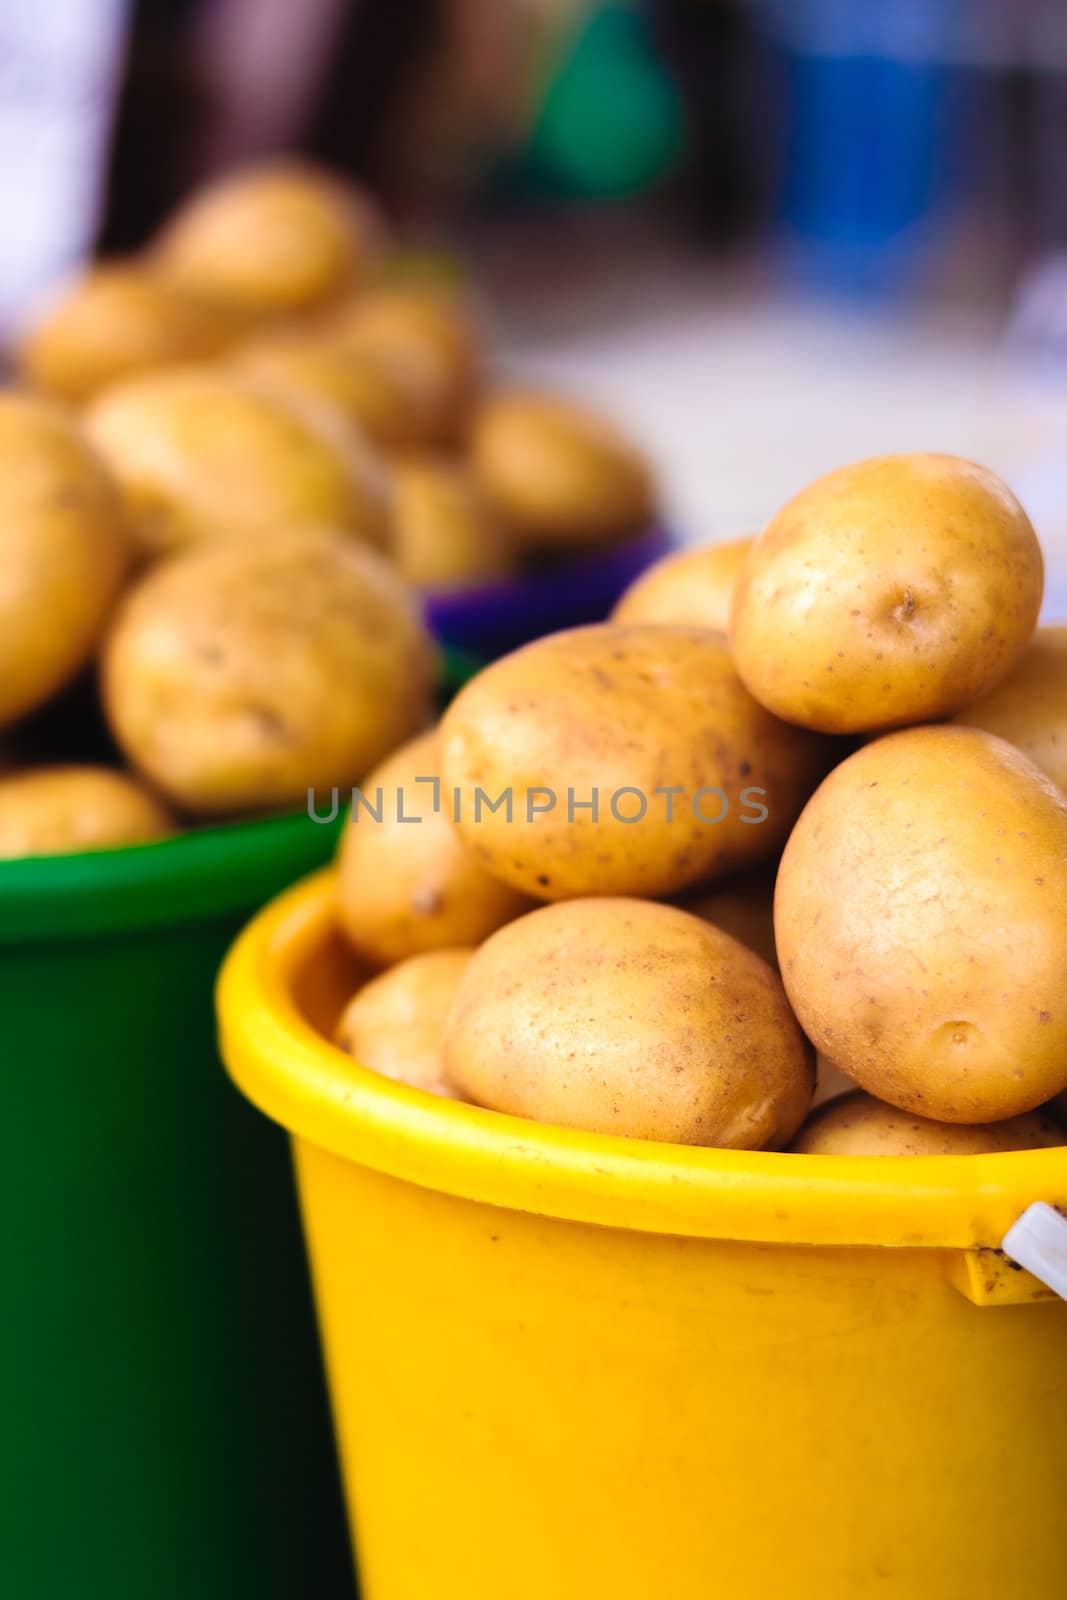 Potatoes at local market by ryhor